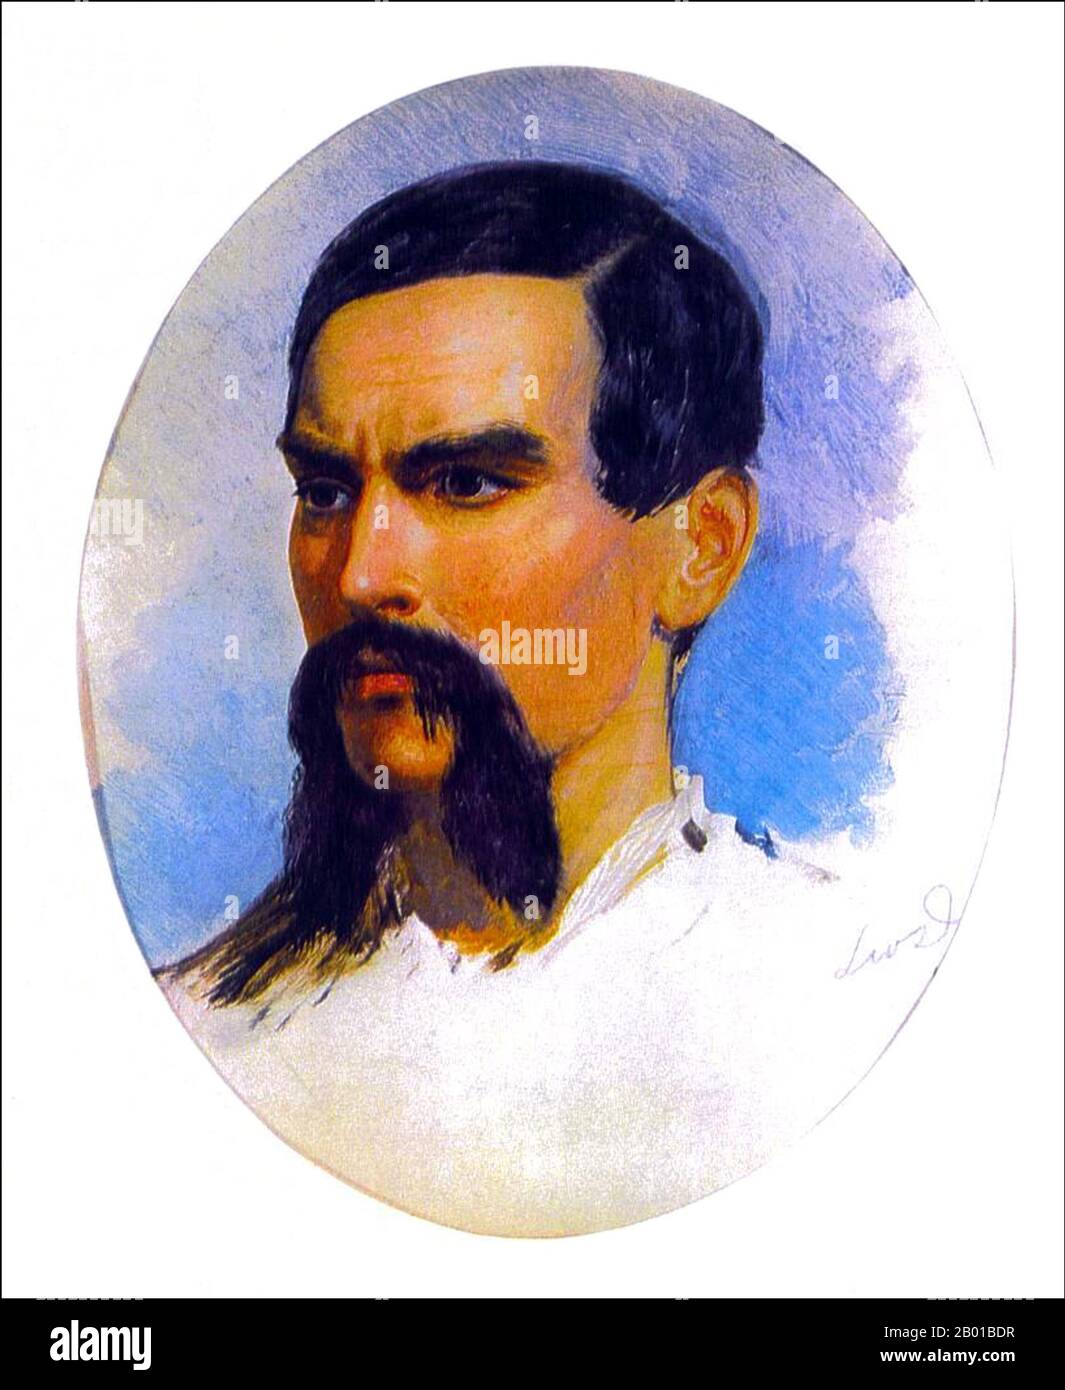 United Kingdom: Sir Richard Francis Burton (19 March 1821 - 20 October 1890). Oil on canvas marriage portrait by Louis Lesanges (fl. 19th century), 1861.  Captain Sir Richard Francis Burton KCMG FRGS was an English explorer, translator, writer, soldier, orientalist, ethnologist, linguist, poet, hypnotist, fencer and diplomat. He was known for his travels and explorations within Asia and Africa as well as his extraordinary knowledge of languages and cultures. Stock Photo